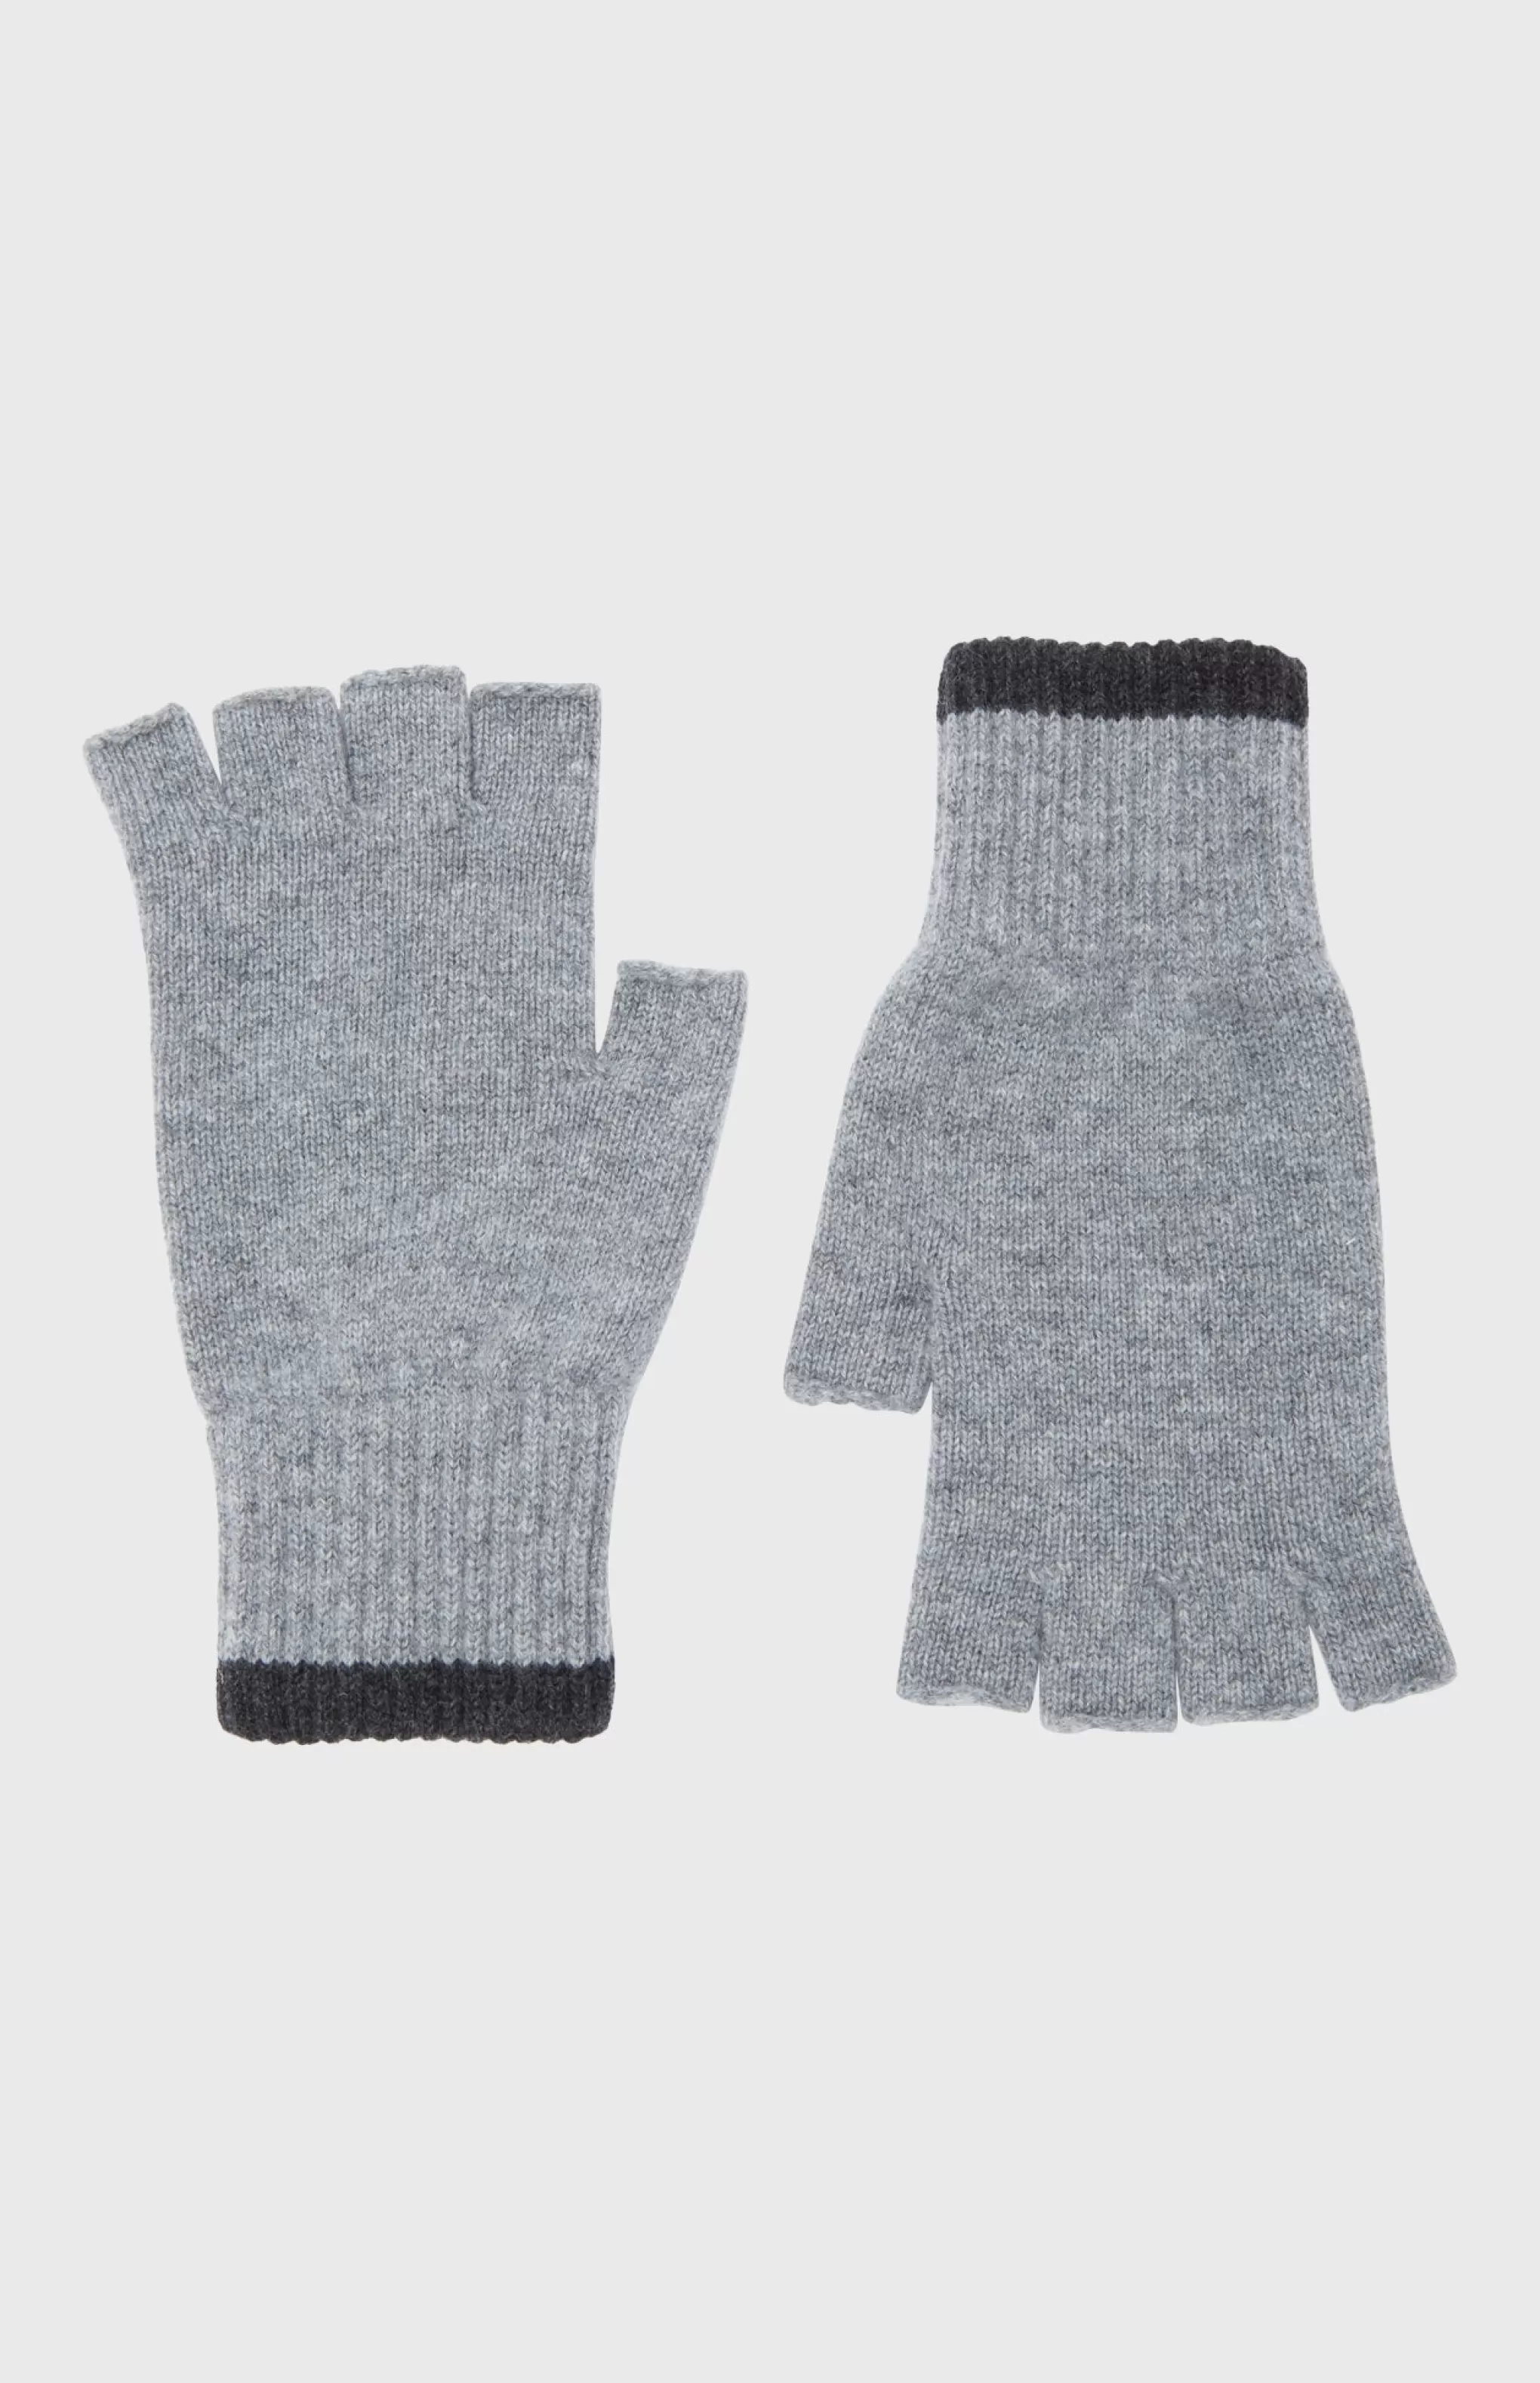 Best Cashmere Fingerless Gloves Contrast Ribs In Flannel Grey And Charcoal Men Cashmere